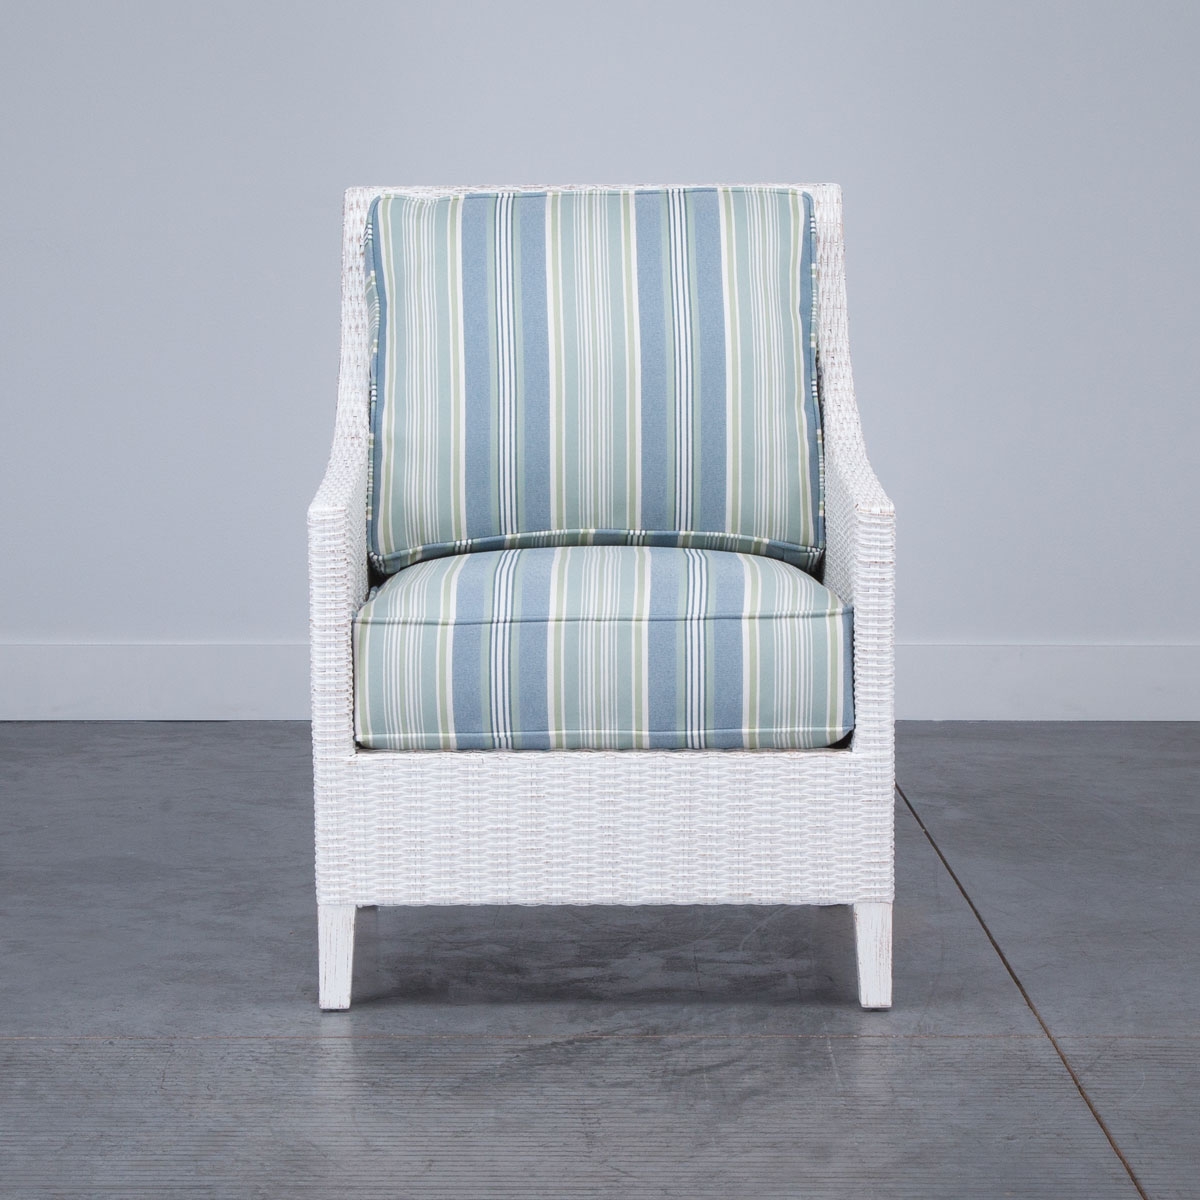 Picture of LONG BEACH CHAIR